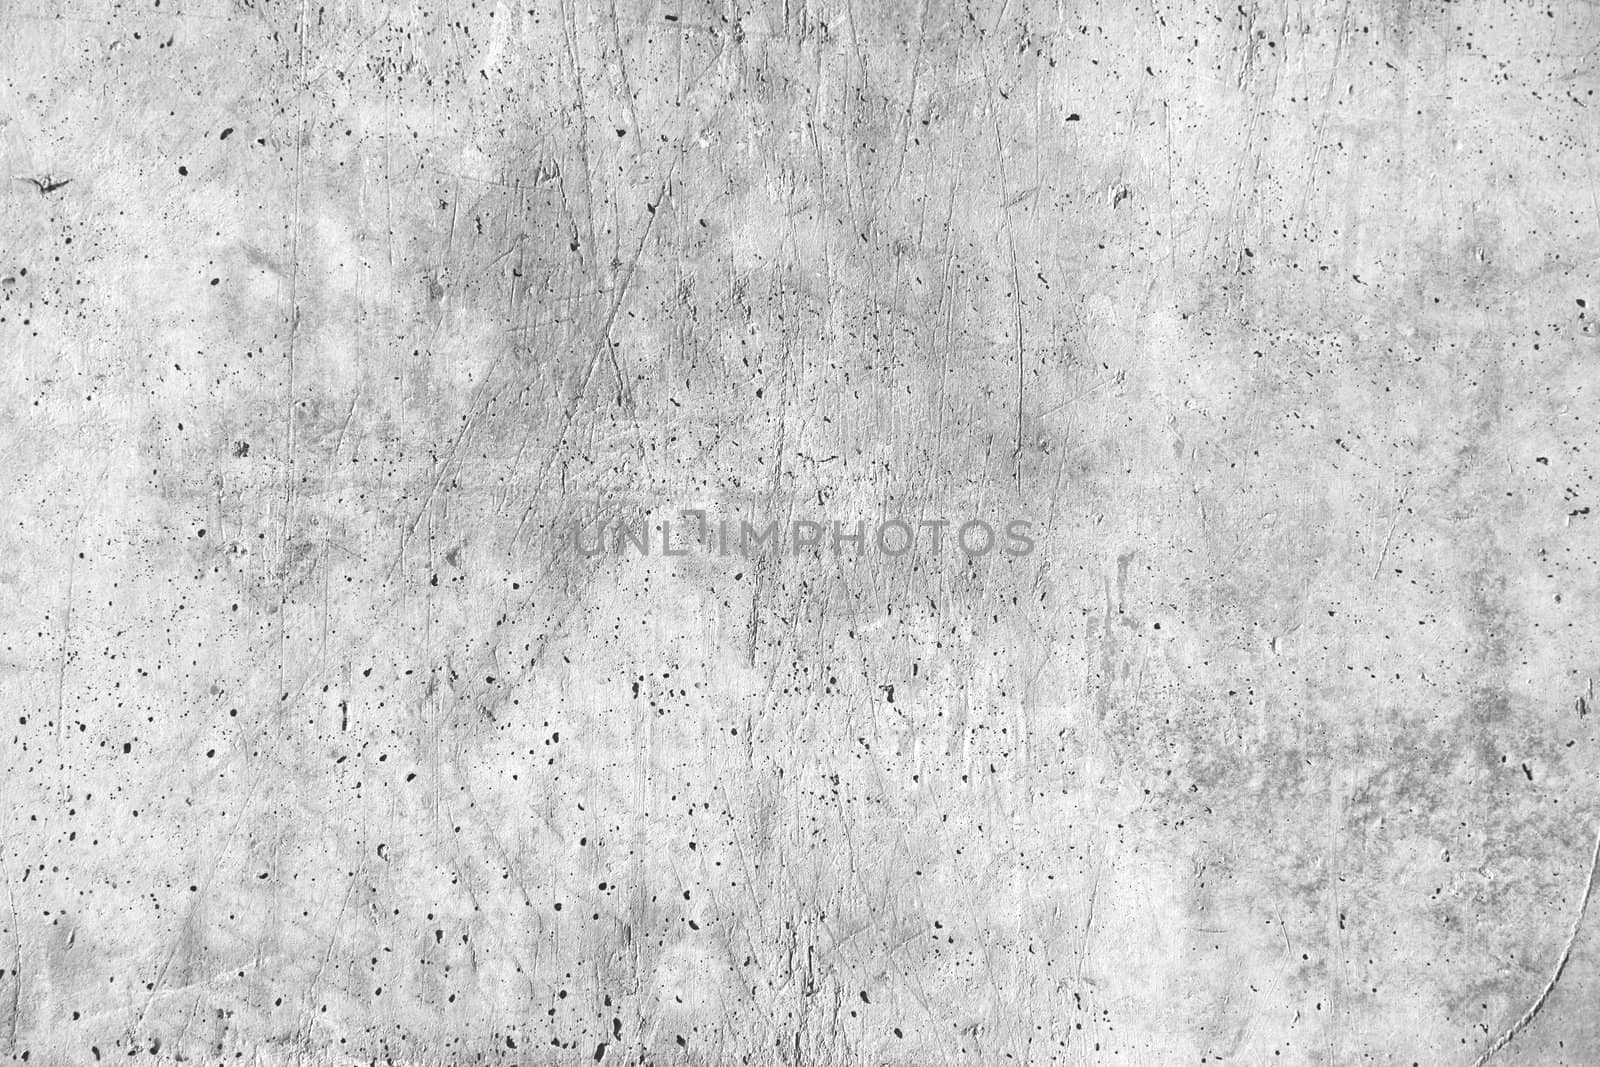 A fine background texture of a grey concrete wall.